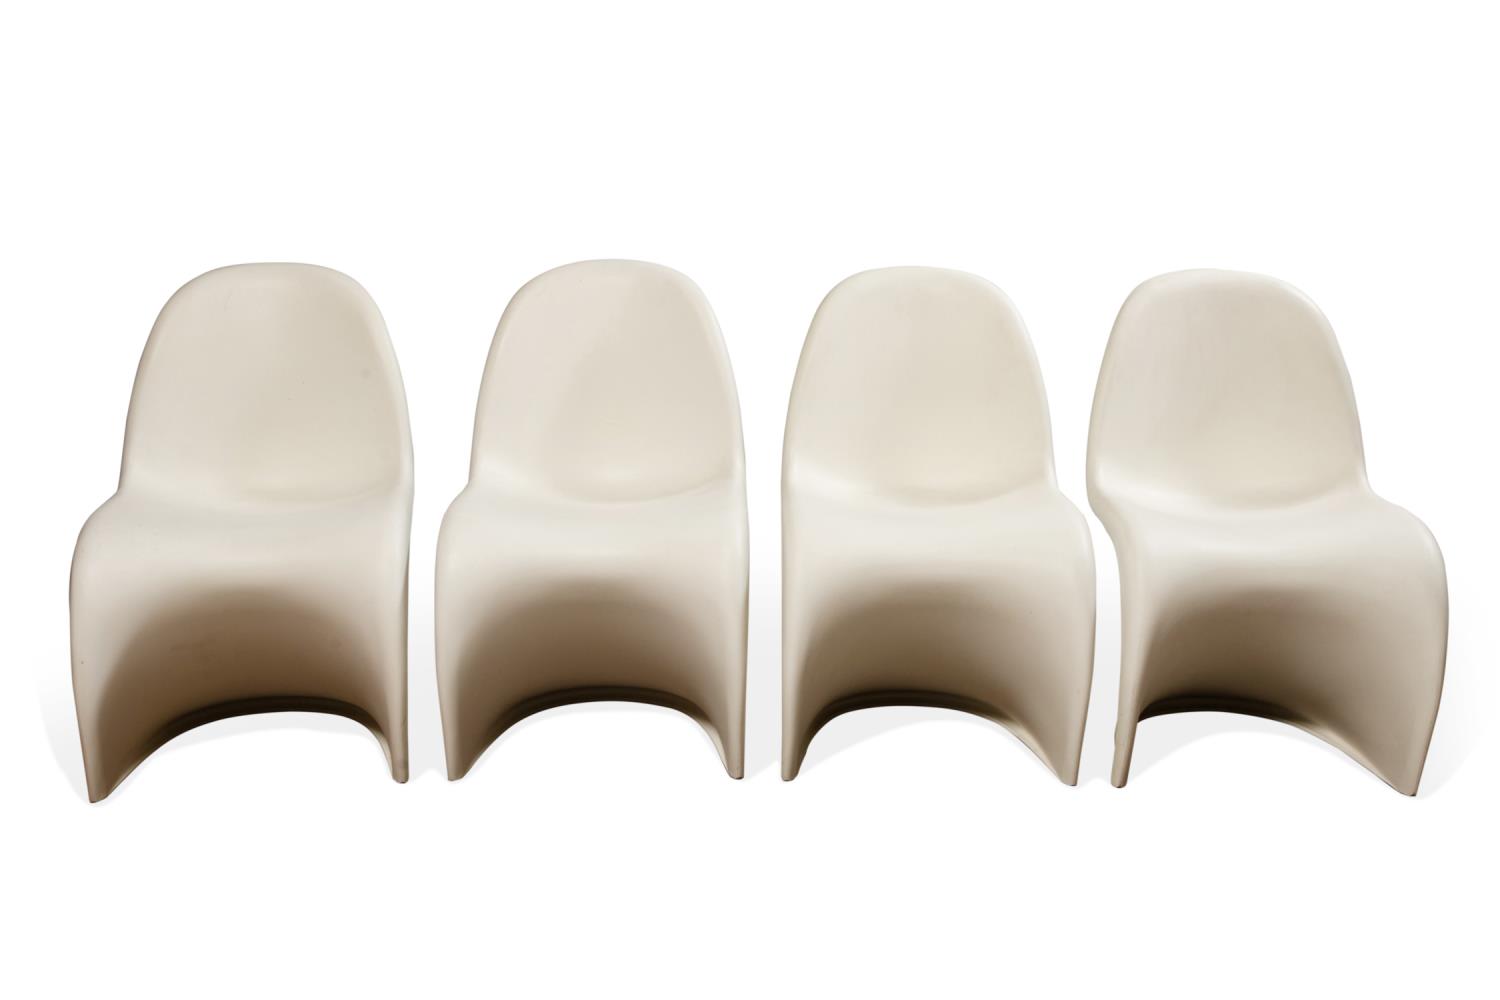 FOUR VERNER PANTON VITRA MOLDED 29f57a